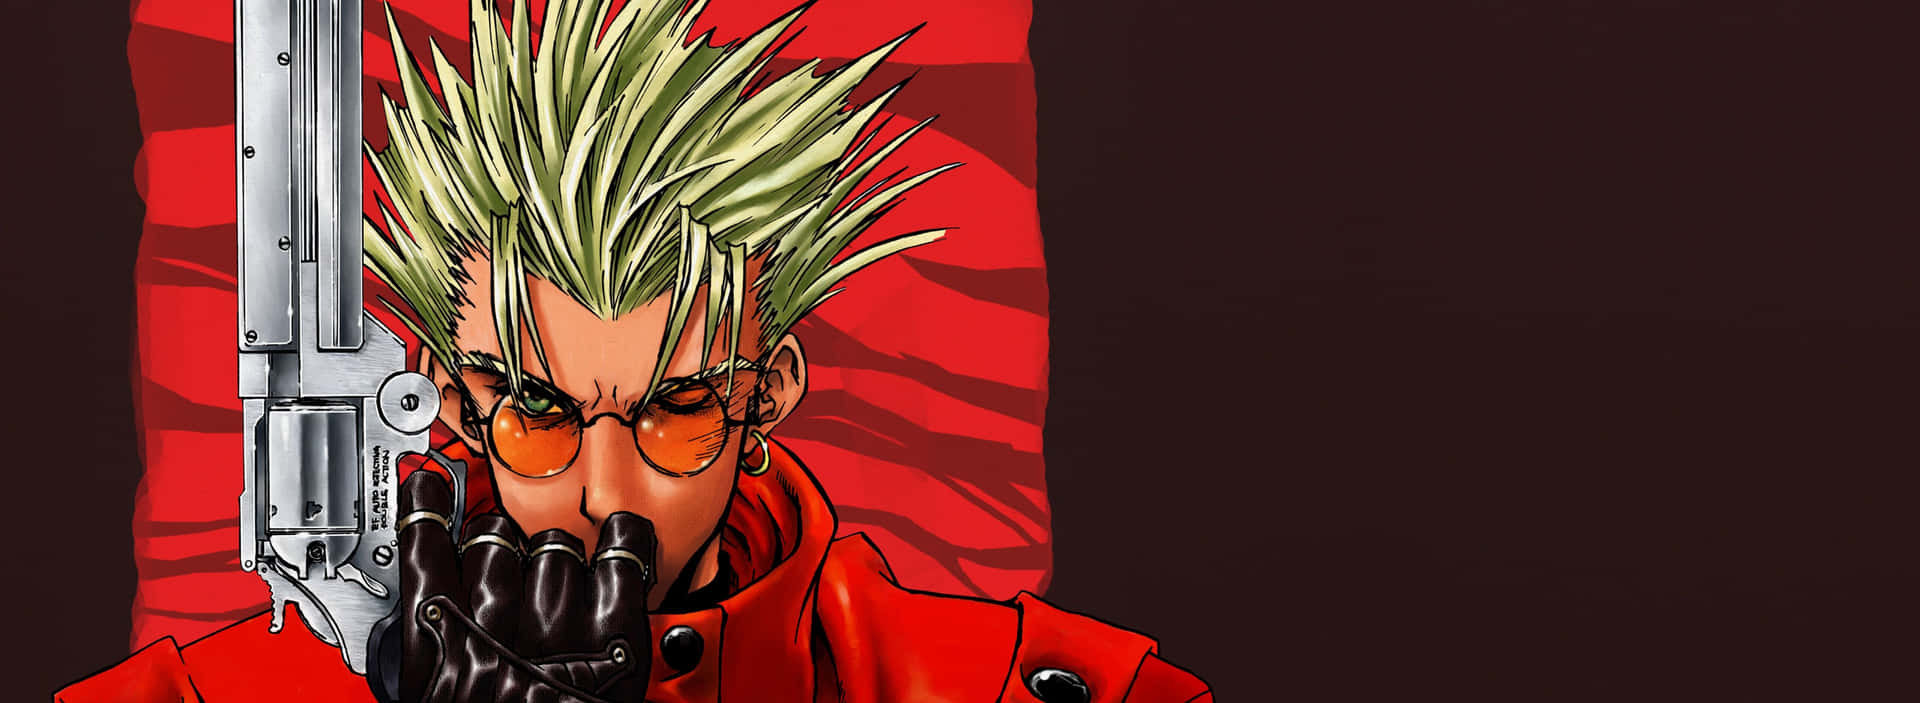 Vash the Stampede from the anime, Trigun